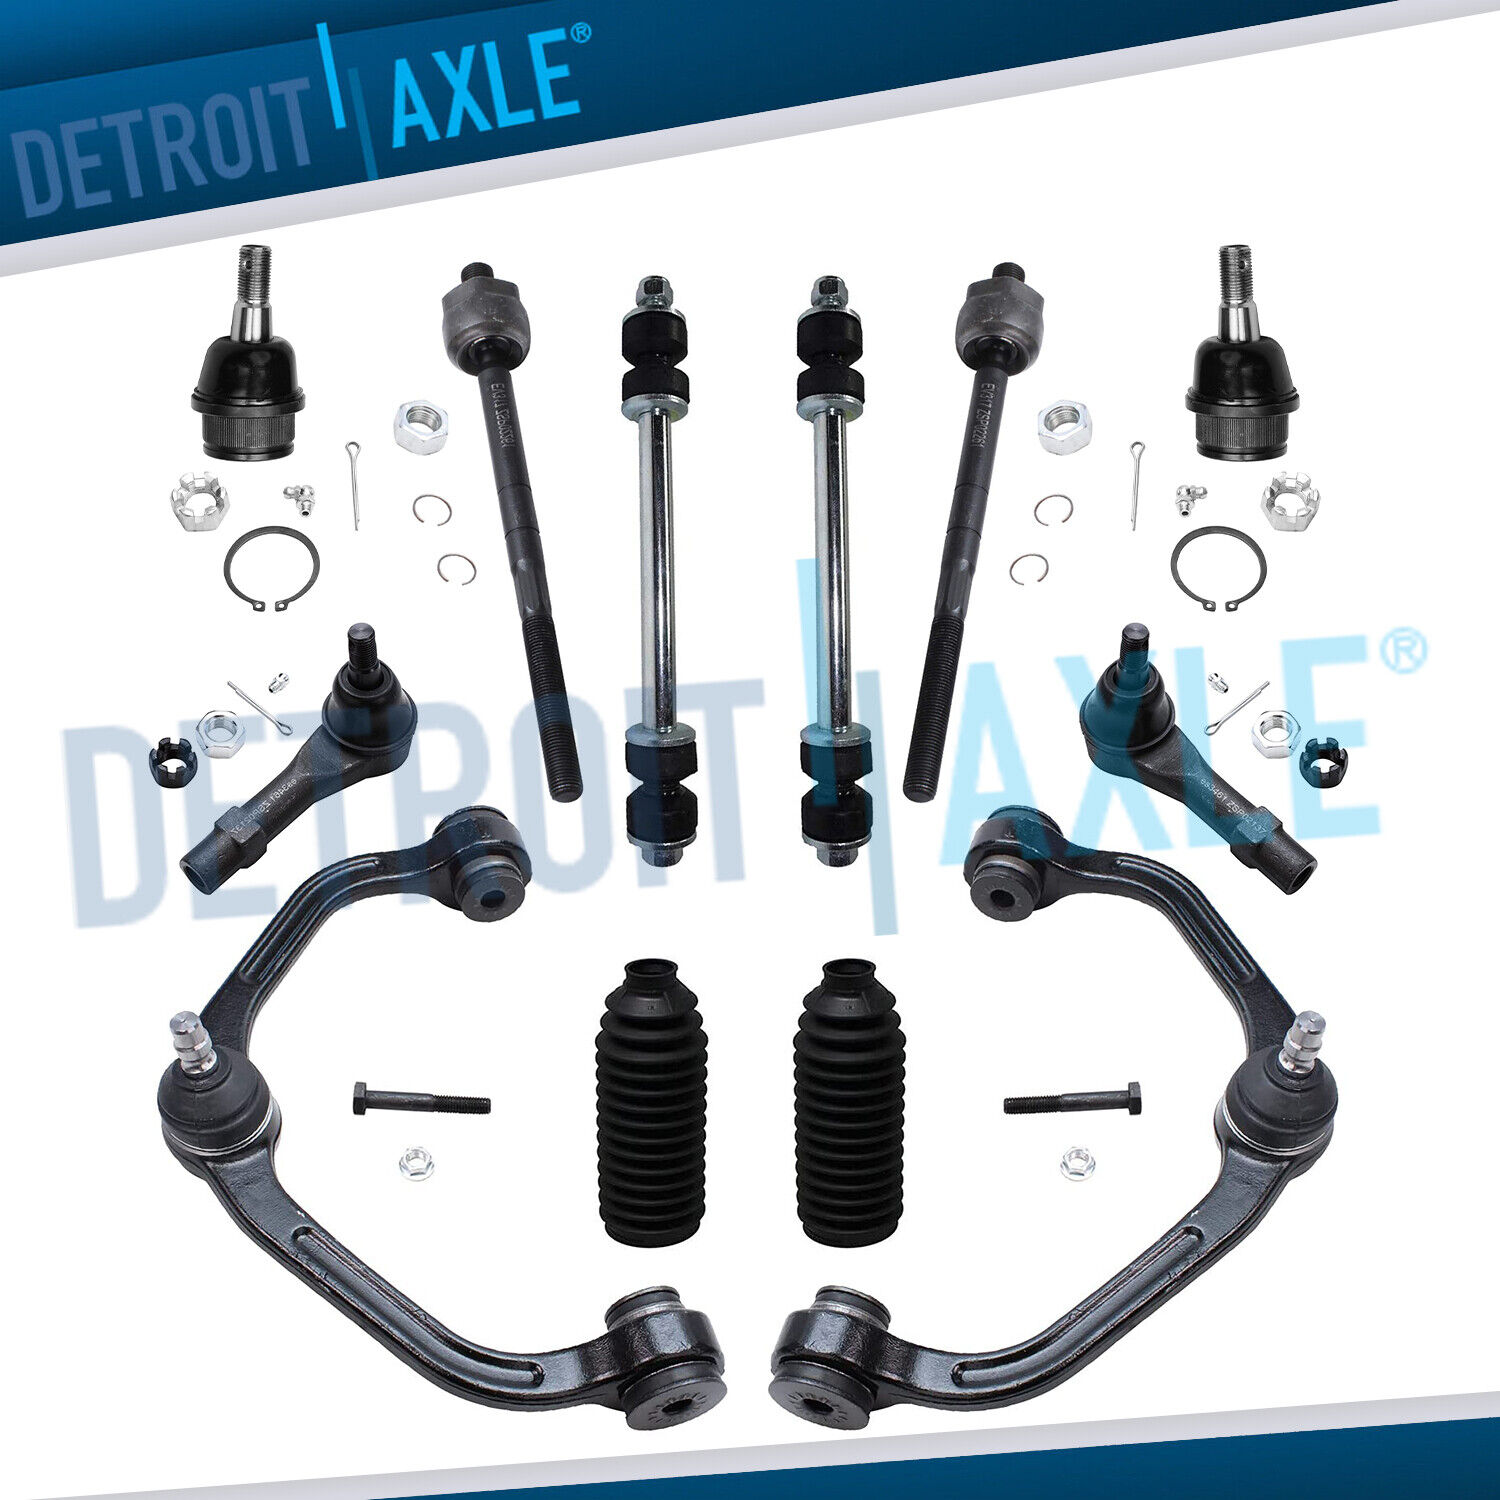 12pc Front Upper Control Arms Suspension Kit for Ford Ranger Mazda B2300 B2500